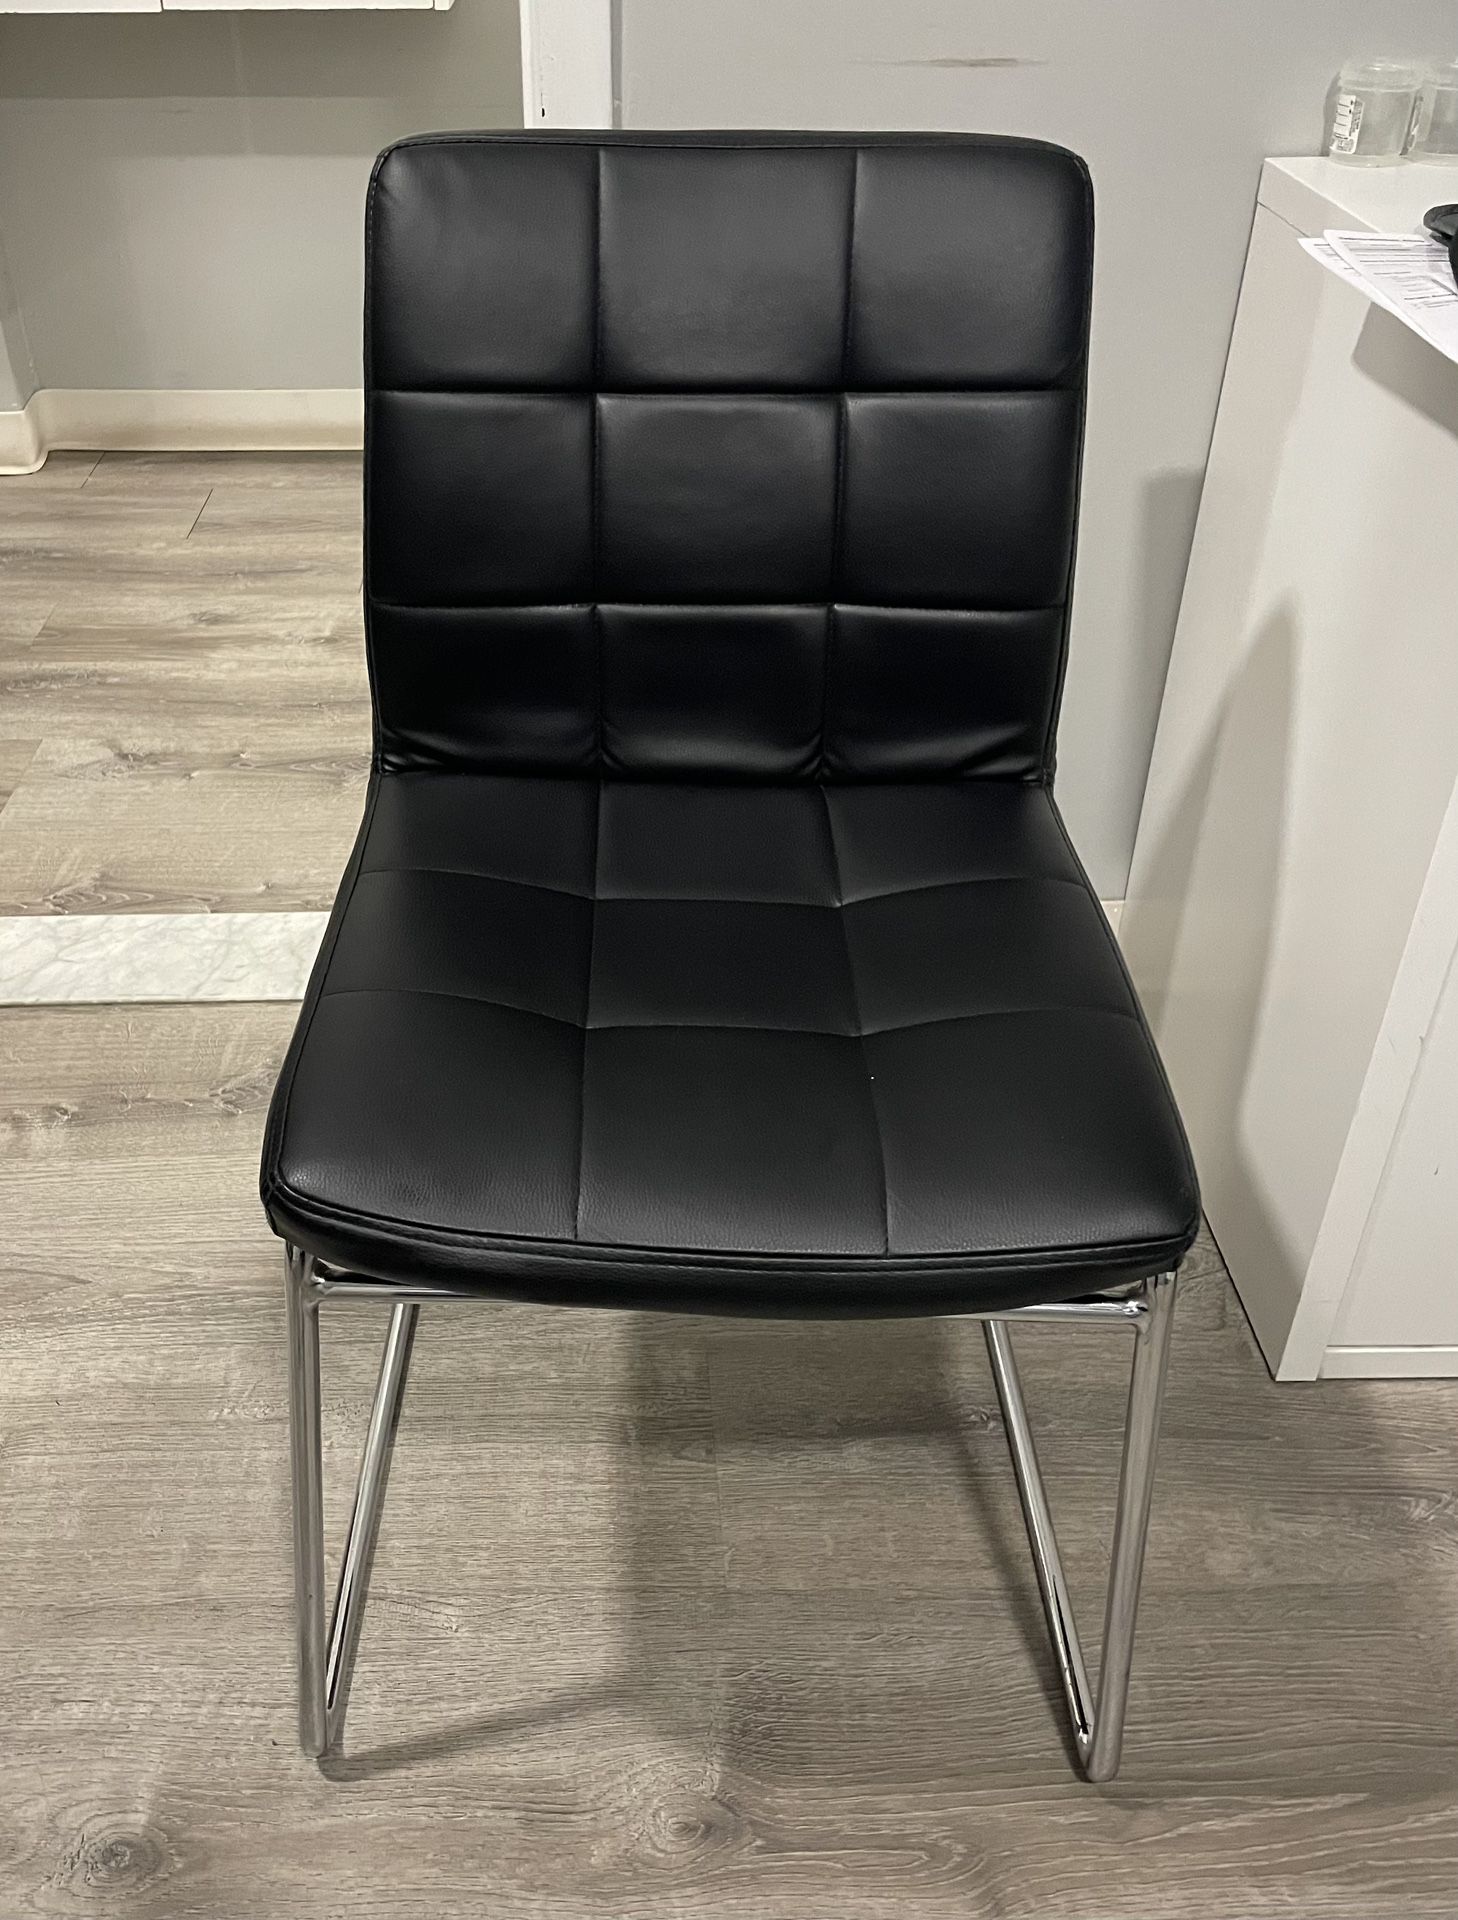  Guest/Reception Dining Chair with Faux Leather  Duhome WY-732 Stool 